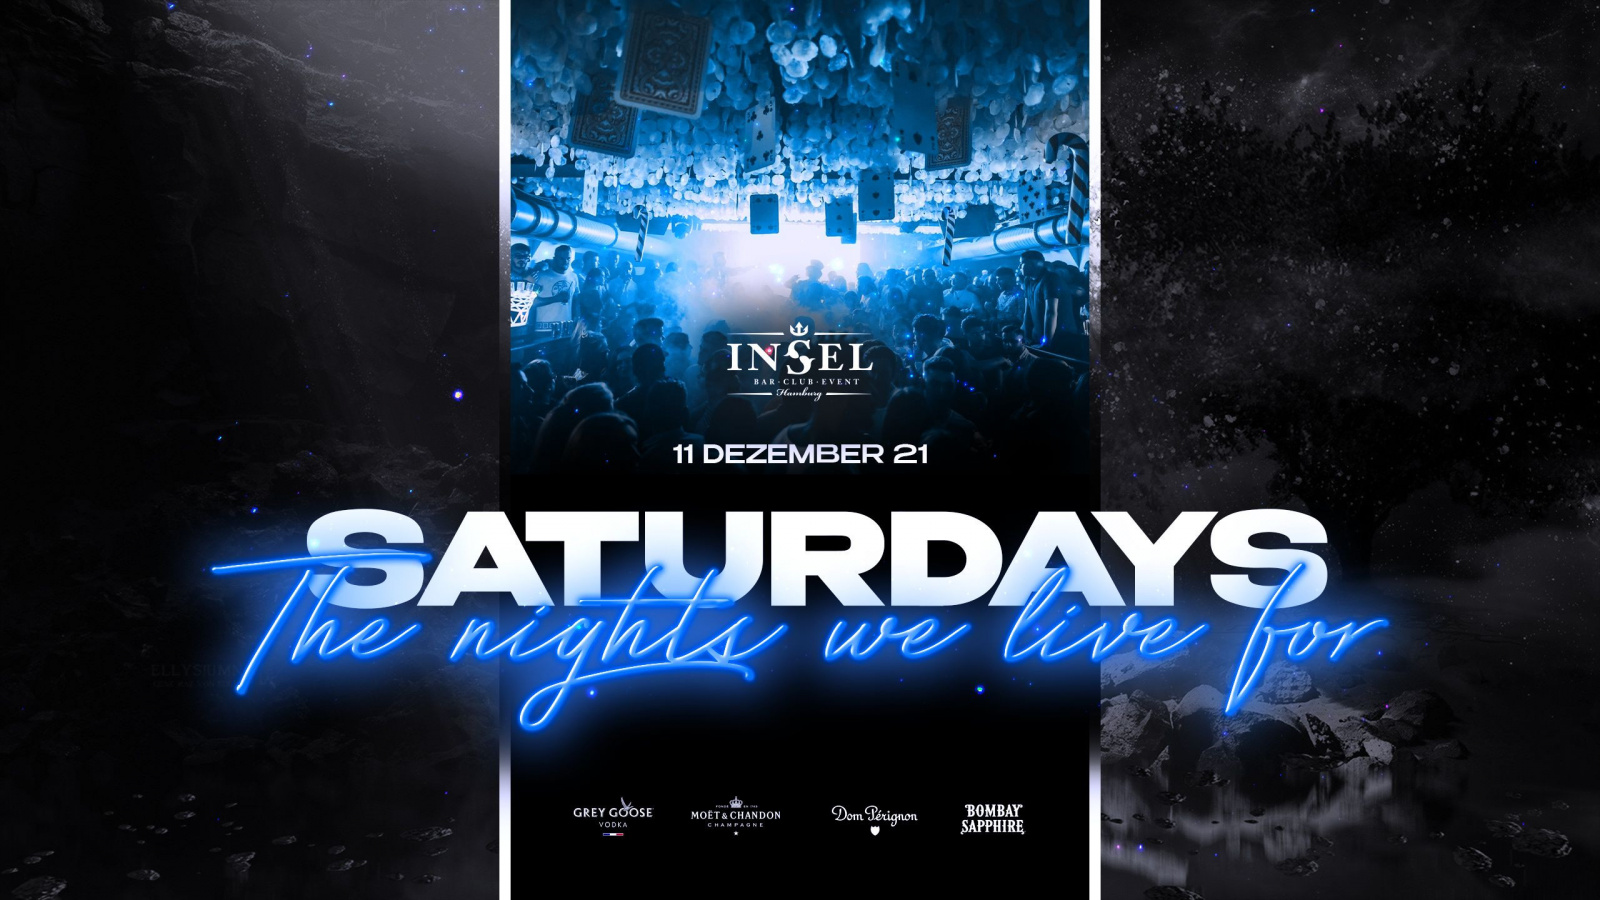 INSEL SATURDAYS - THE NIGHTS WE LIVE FOR 